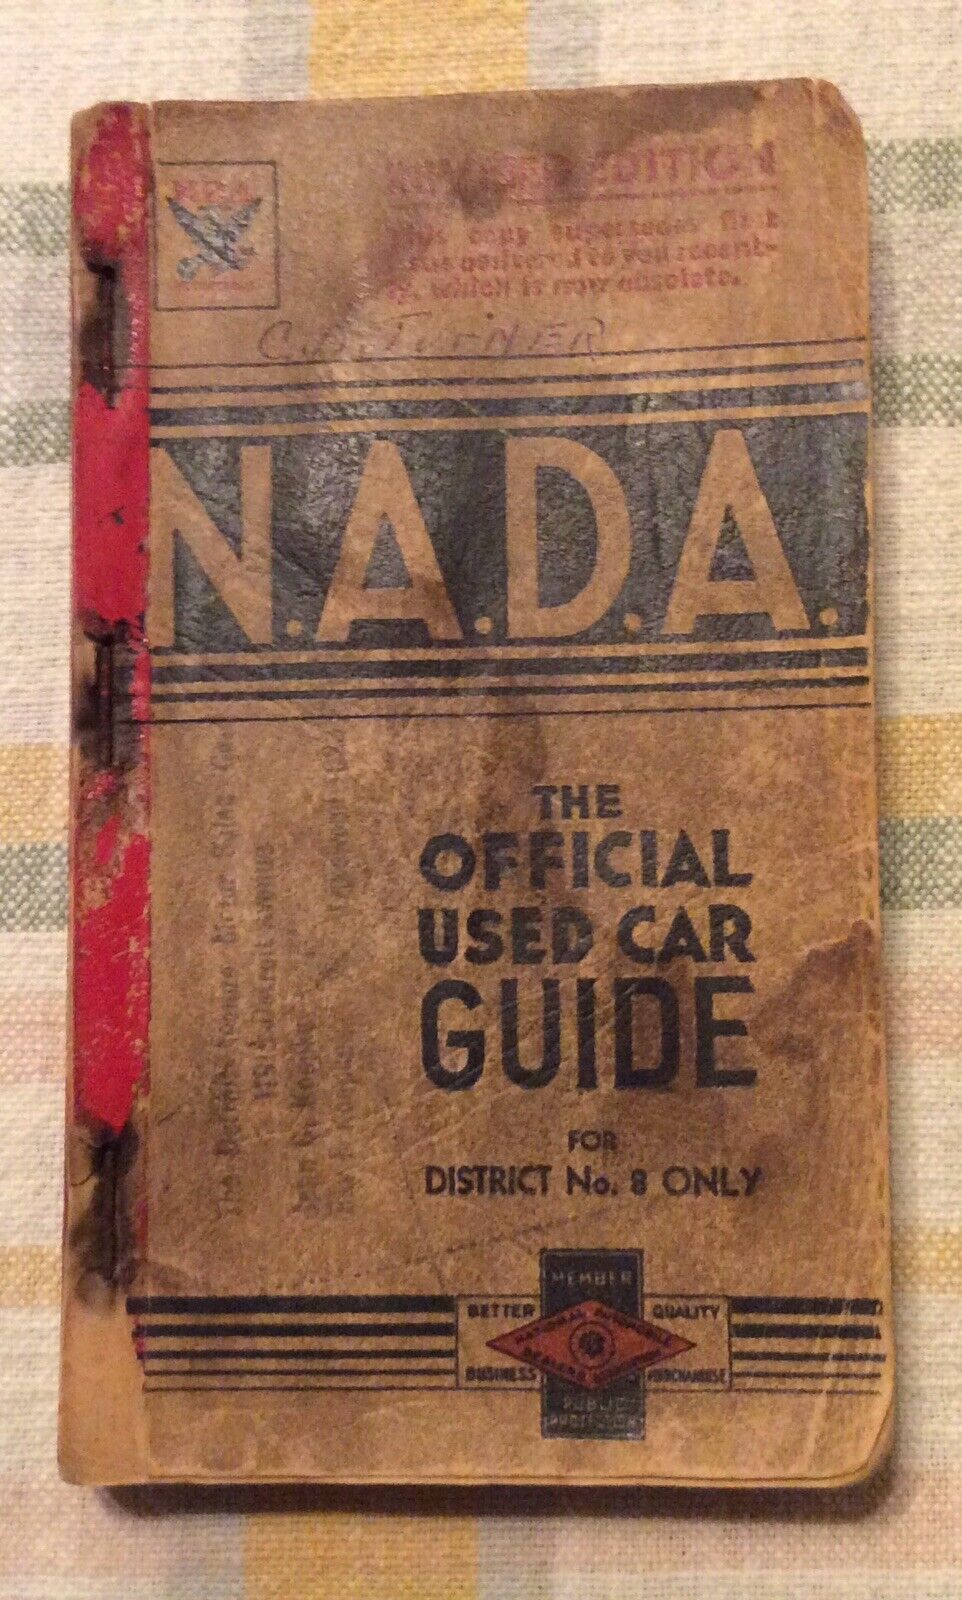 Vintage December 1, 1933 to January 4, 1934 NADA Official Used Car Guide